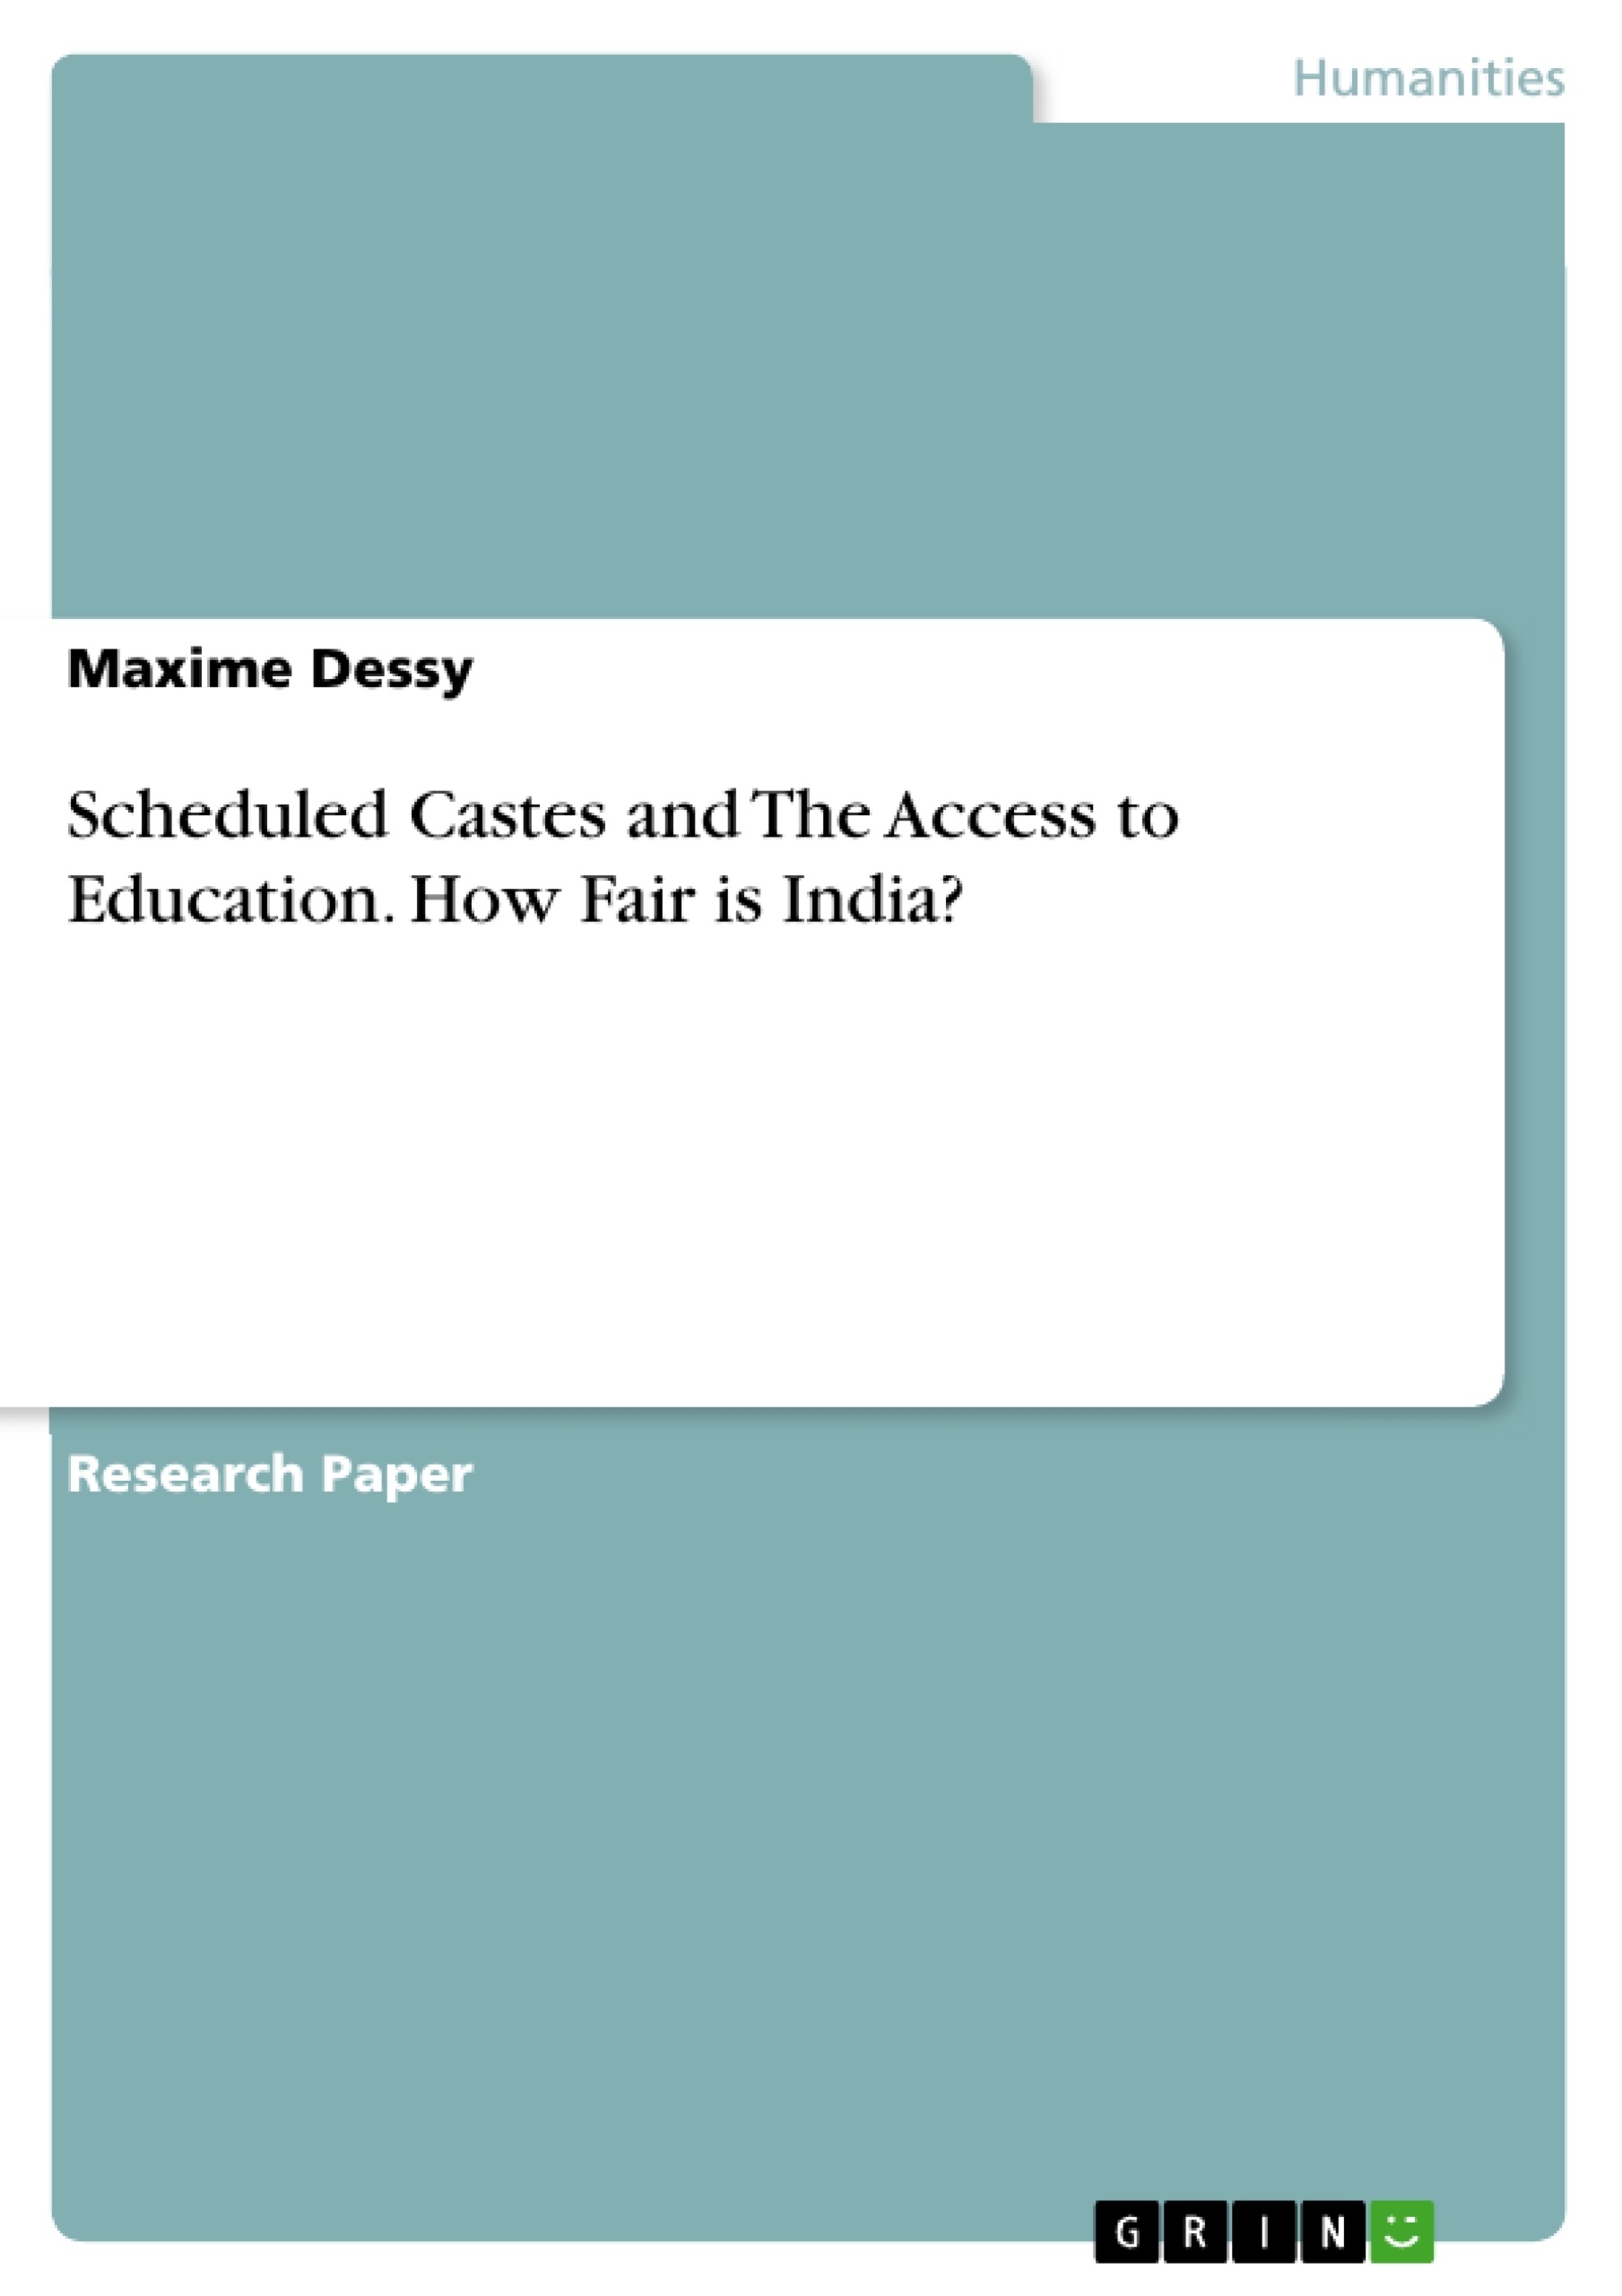 Titre: Scheduled Castes and The Access to Education. How Fair is India?